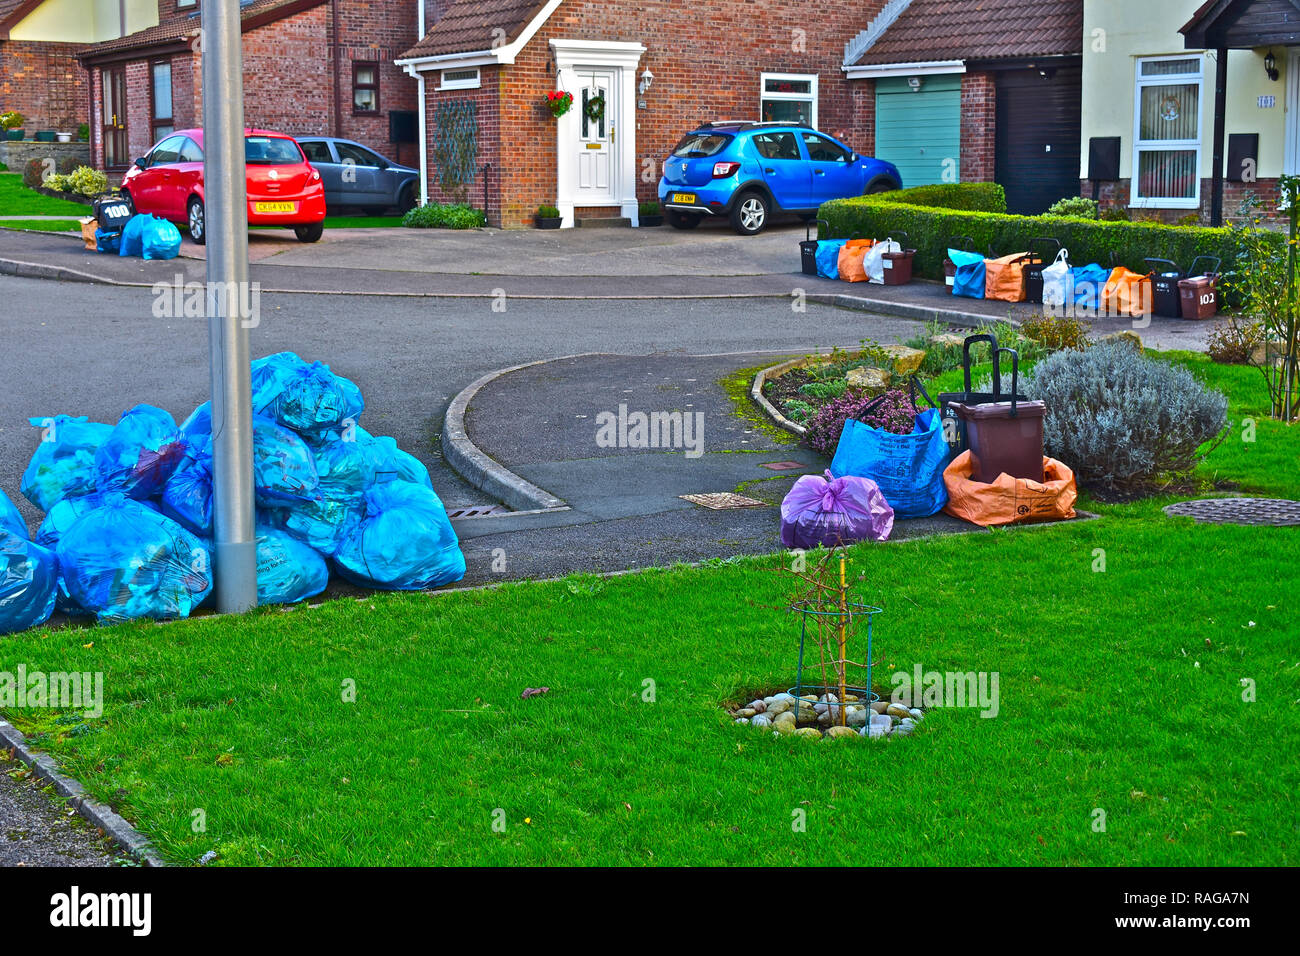 Recycling bags, bins and rubbish piled in street waiting for collection in modern neighbourhood of suburban homes. Stock Photo